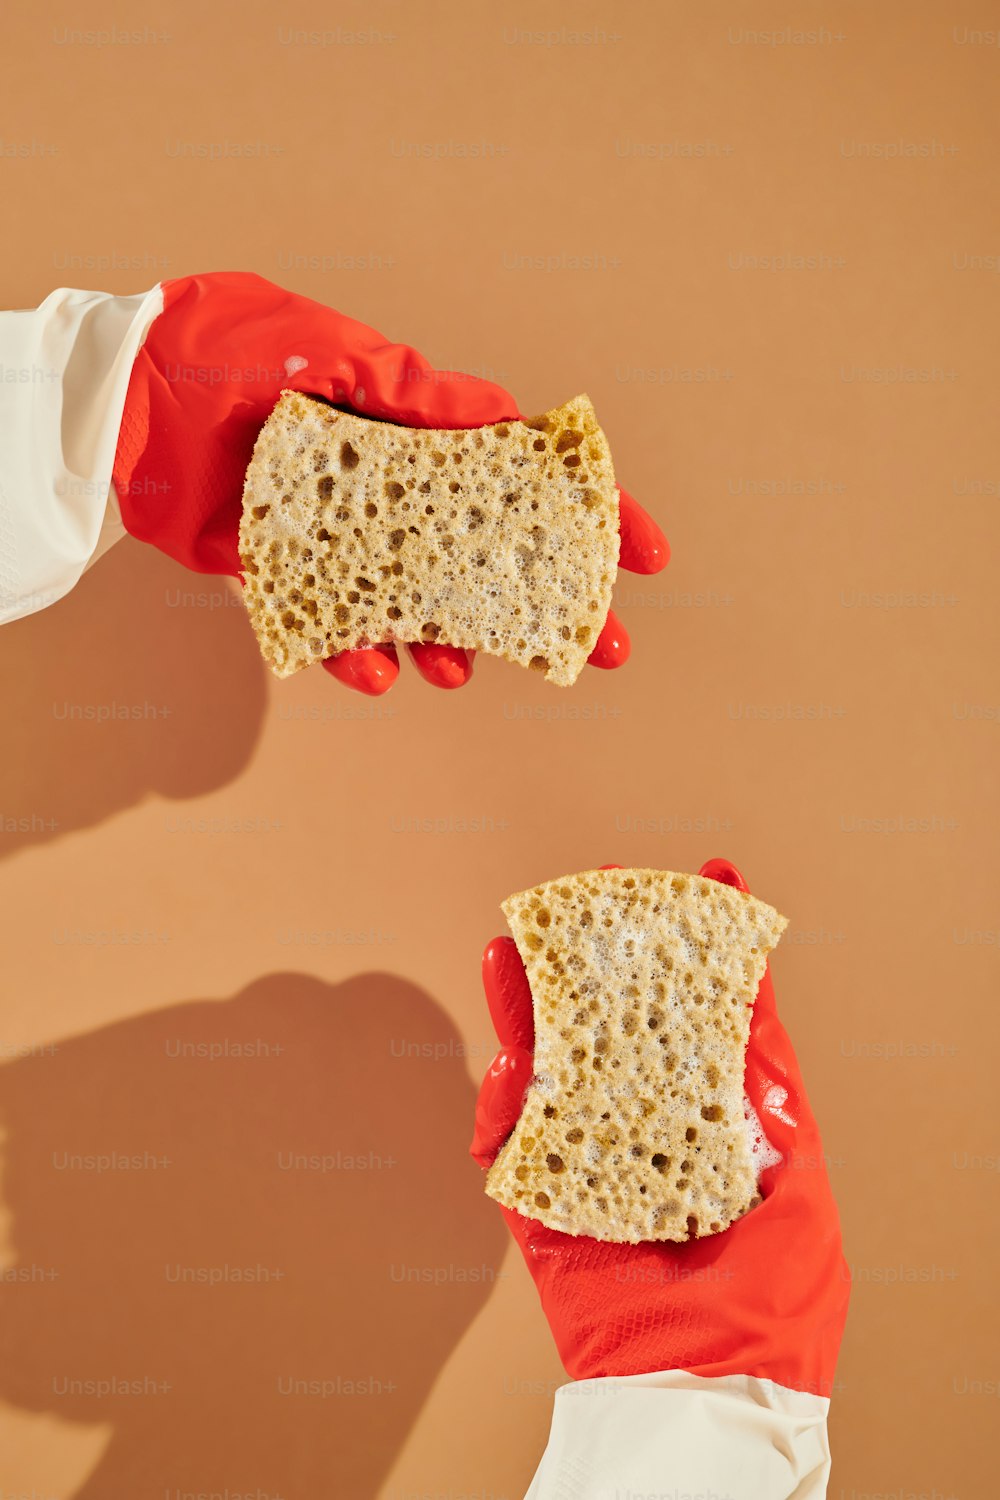 two hands in red gloves holding a piece of bread